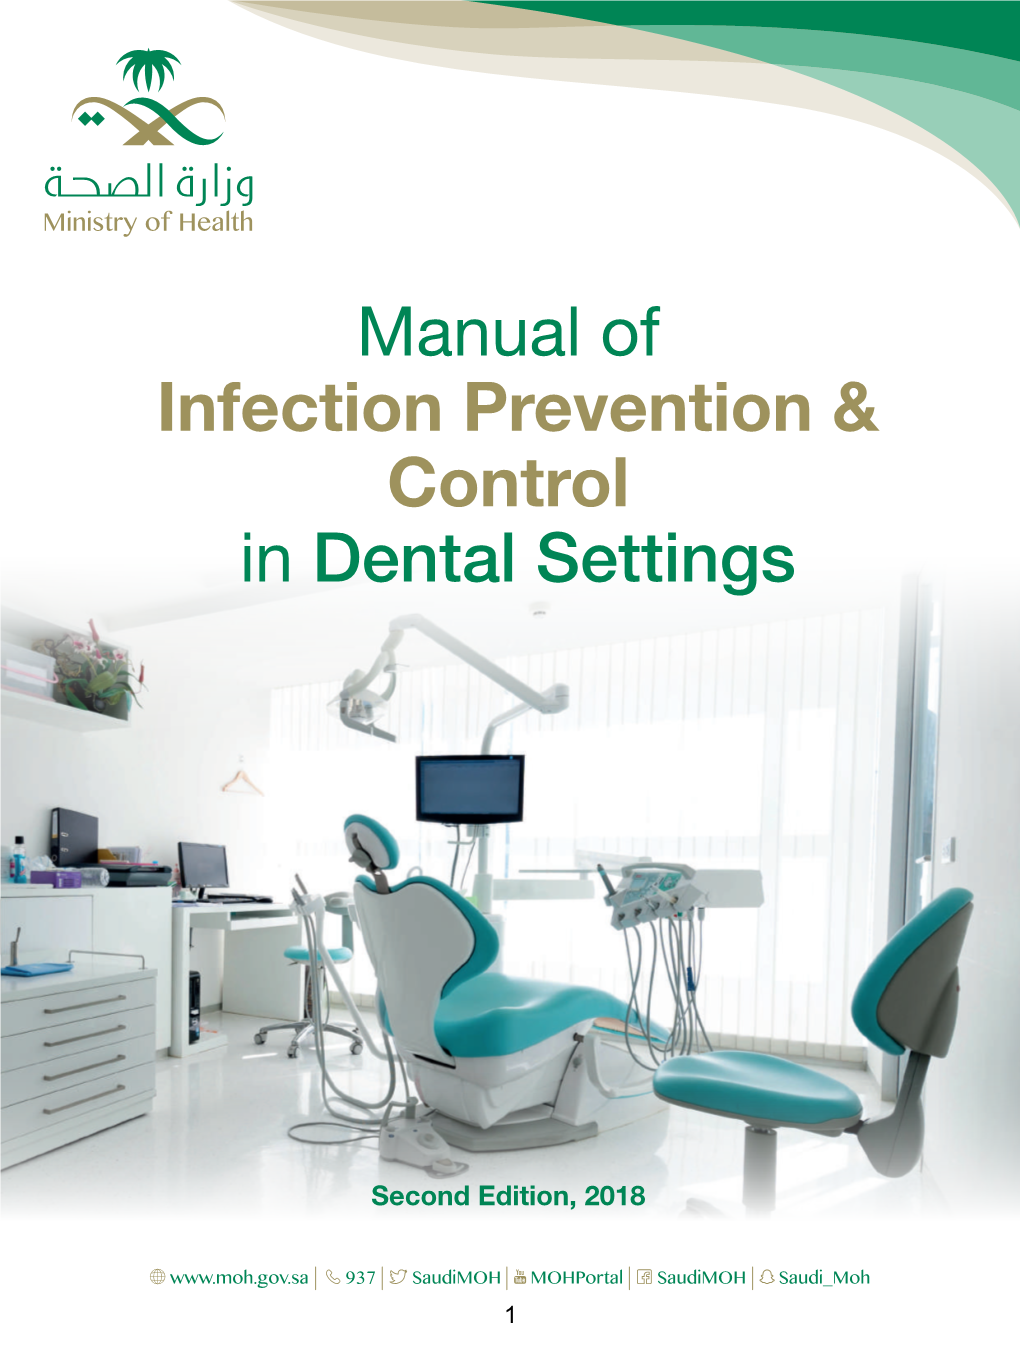 Manual of Infection Prevention & Control in Dental Settings